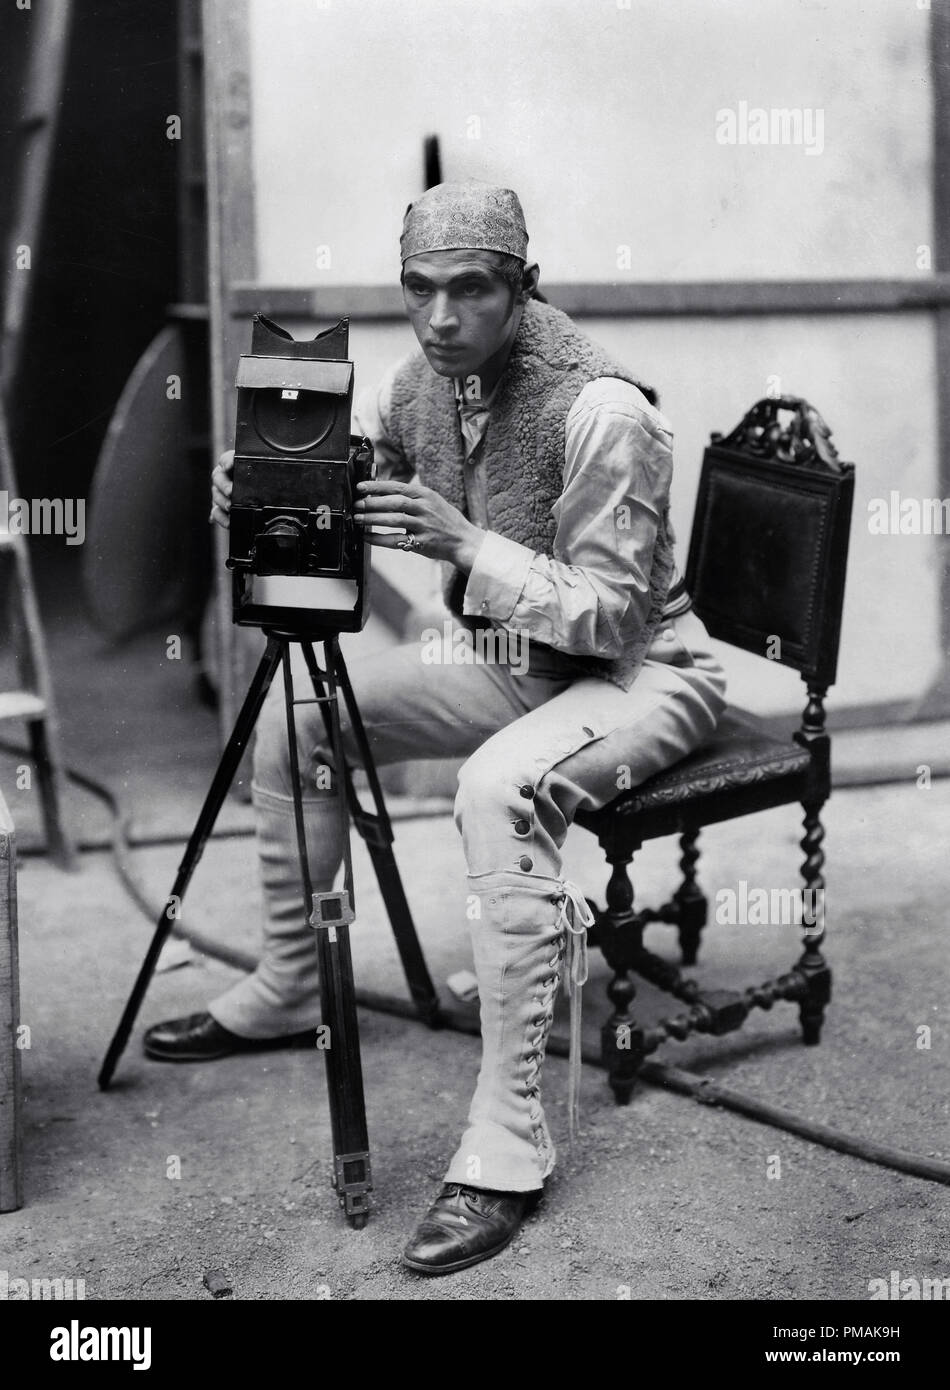 Rudolph Valentino, during the making of "Blood and Sand" (1922) Paramount  File Reference # 33300 337THA Stock Photo - Alamy